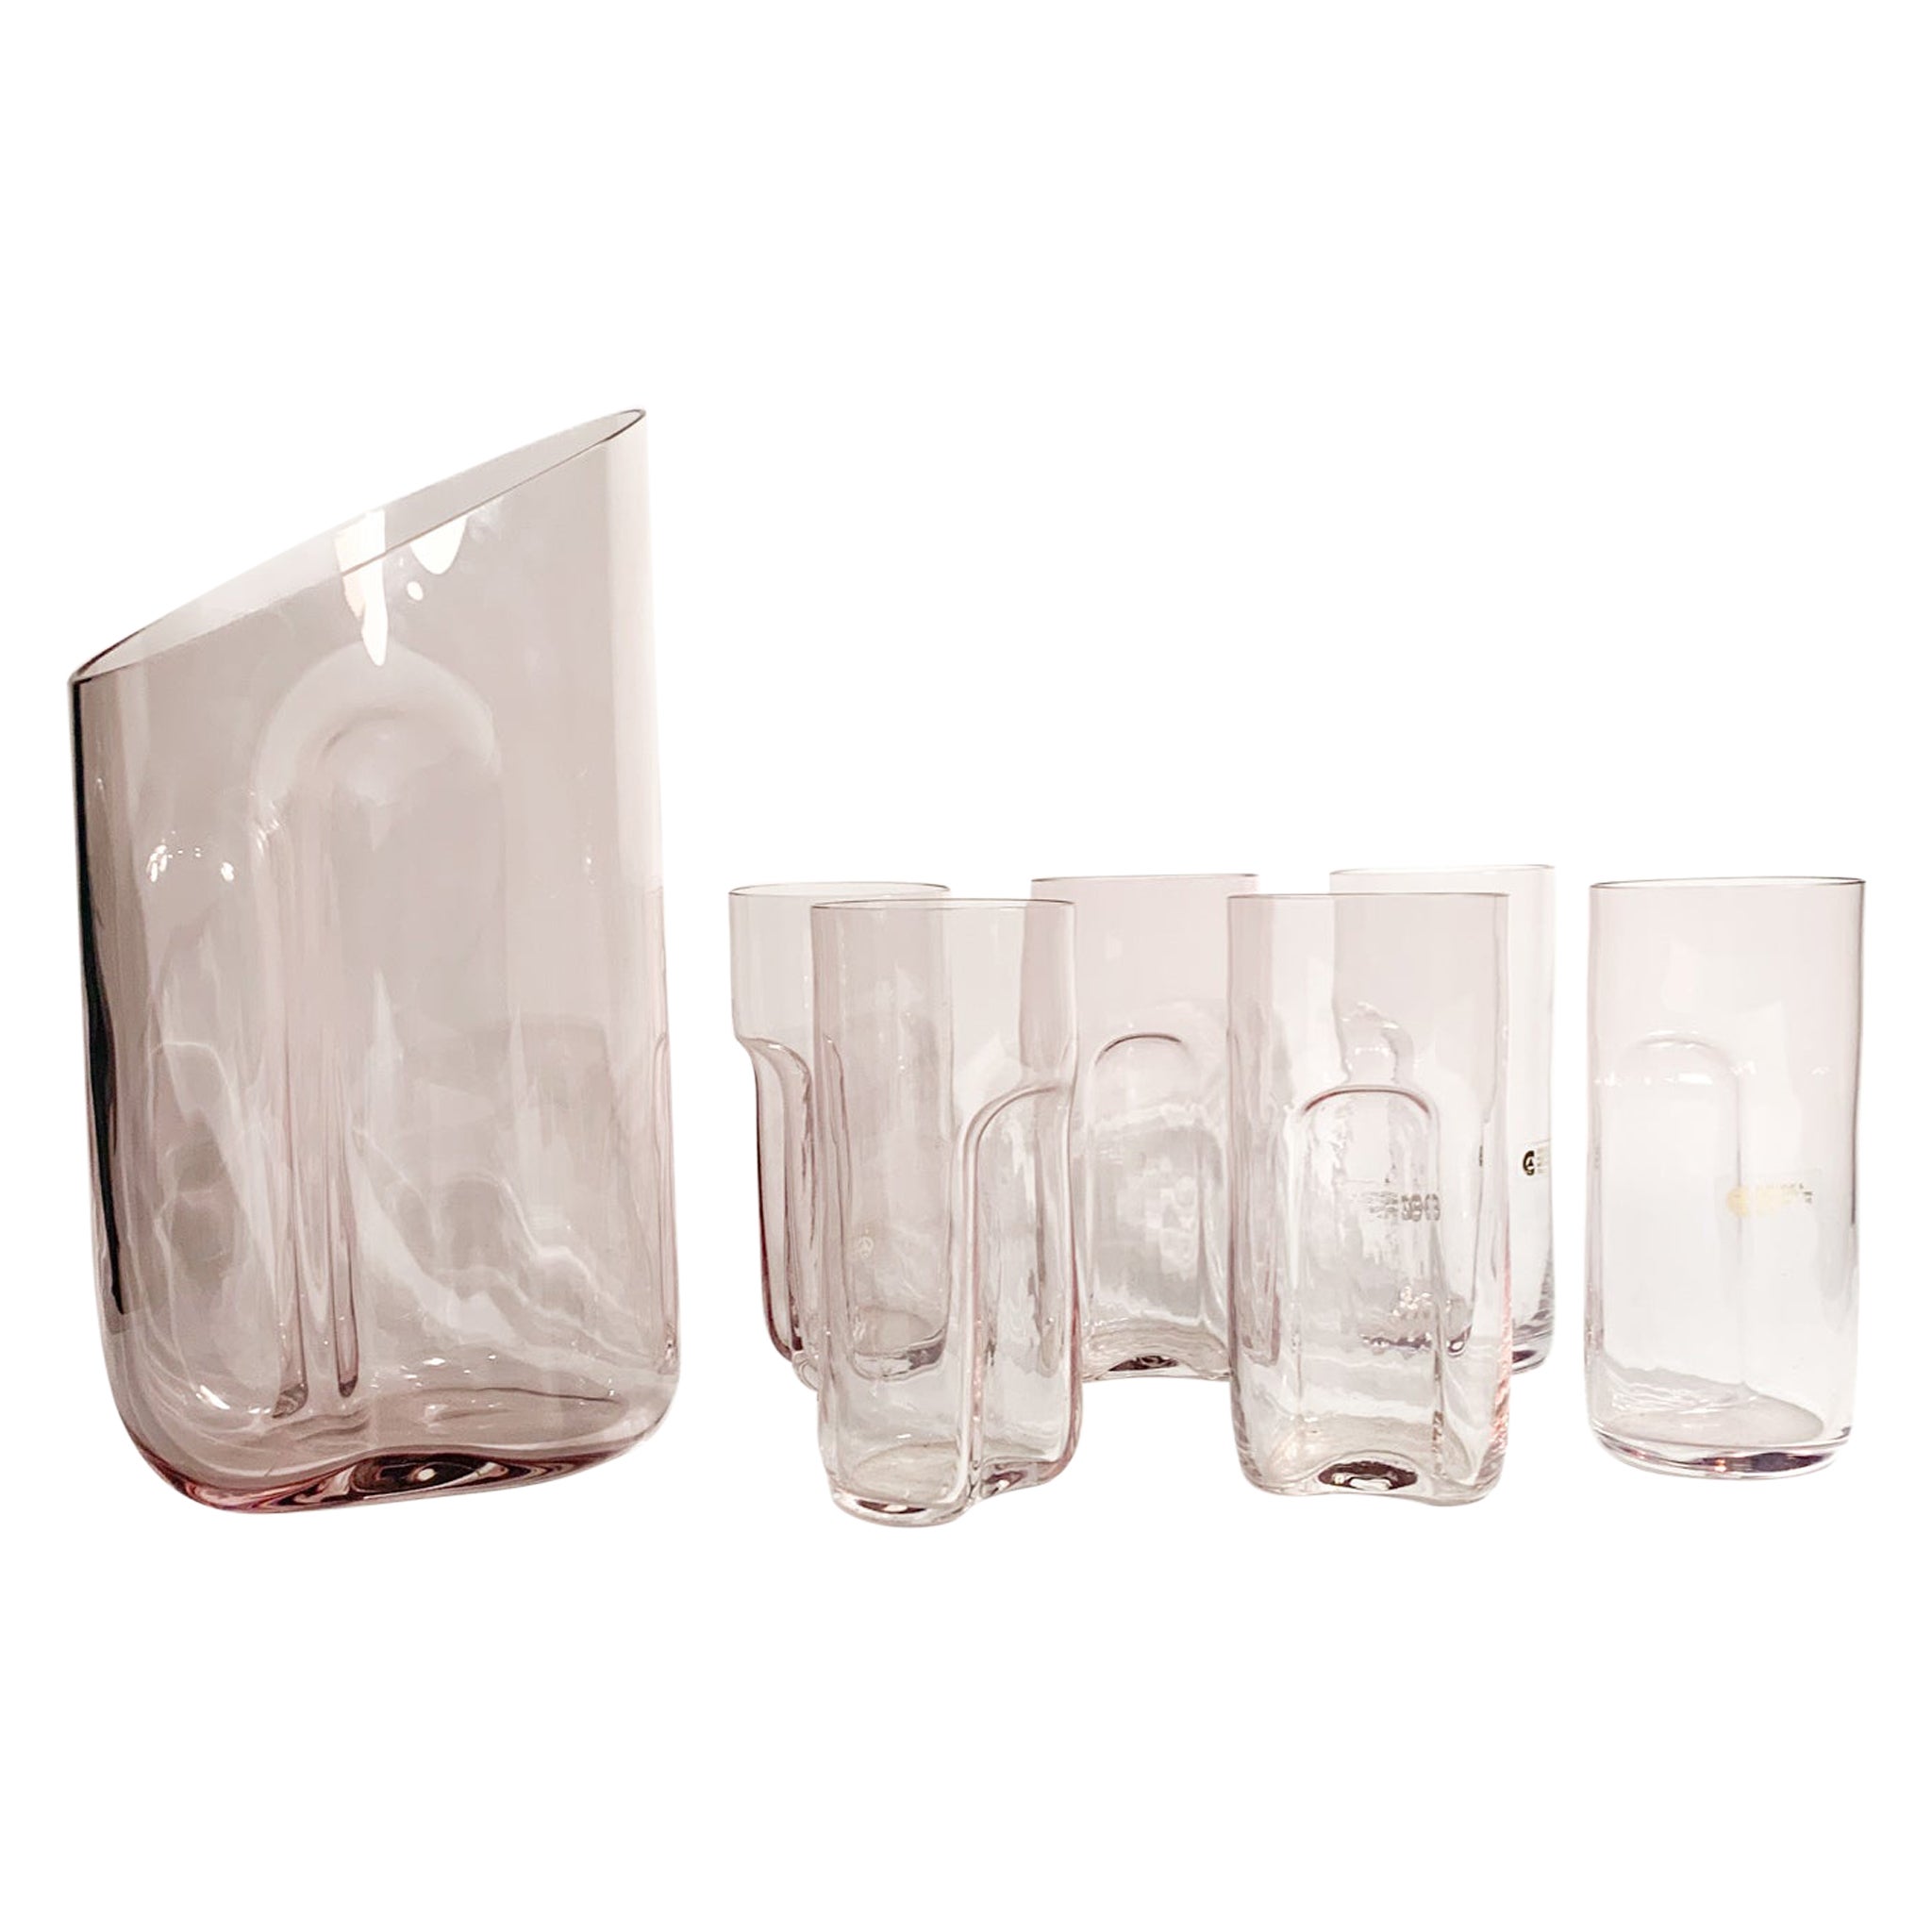 Set of Six Glasses and Carafe in Murano Glass by Cenedese and Albarelli 1970s For Sale